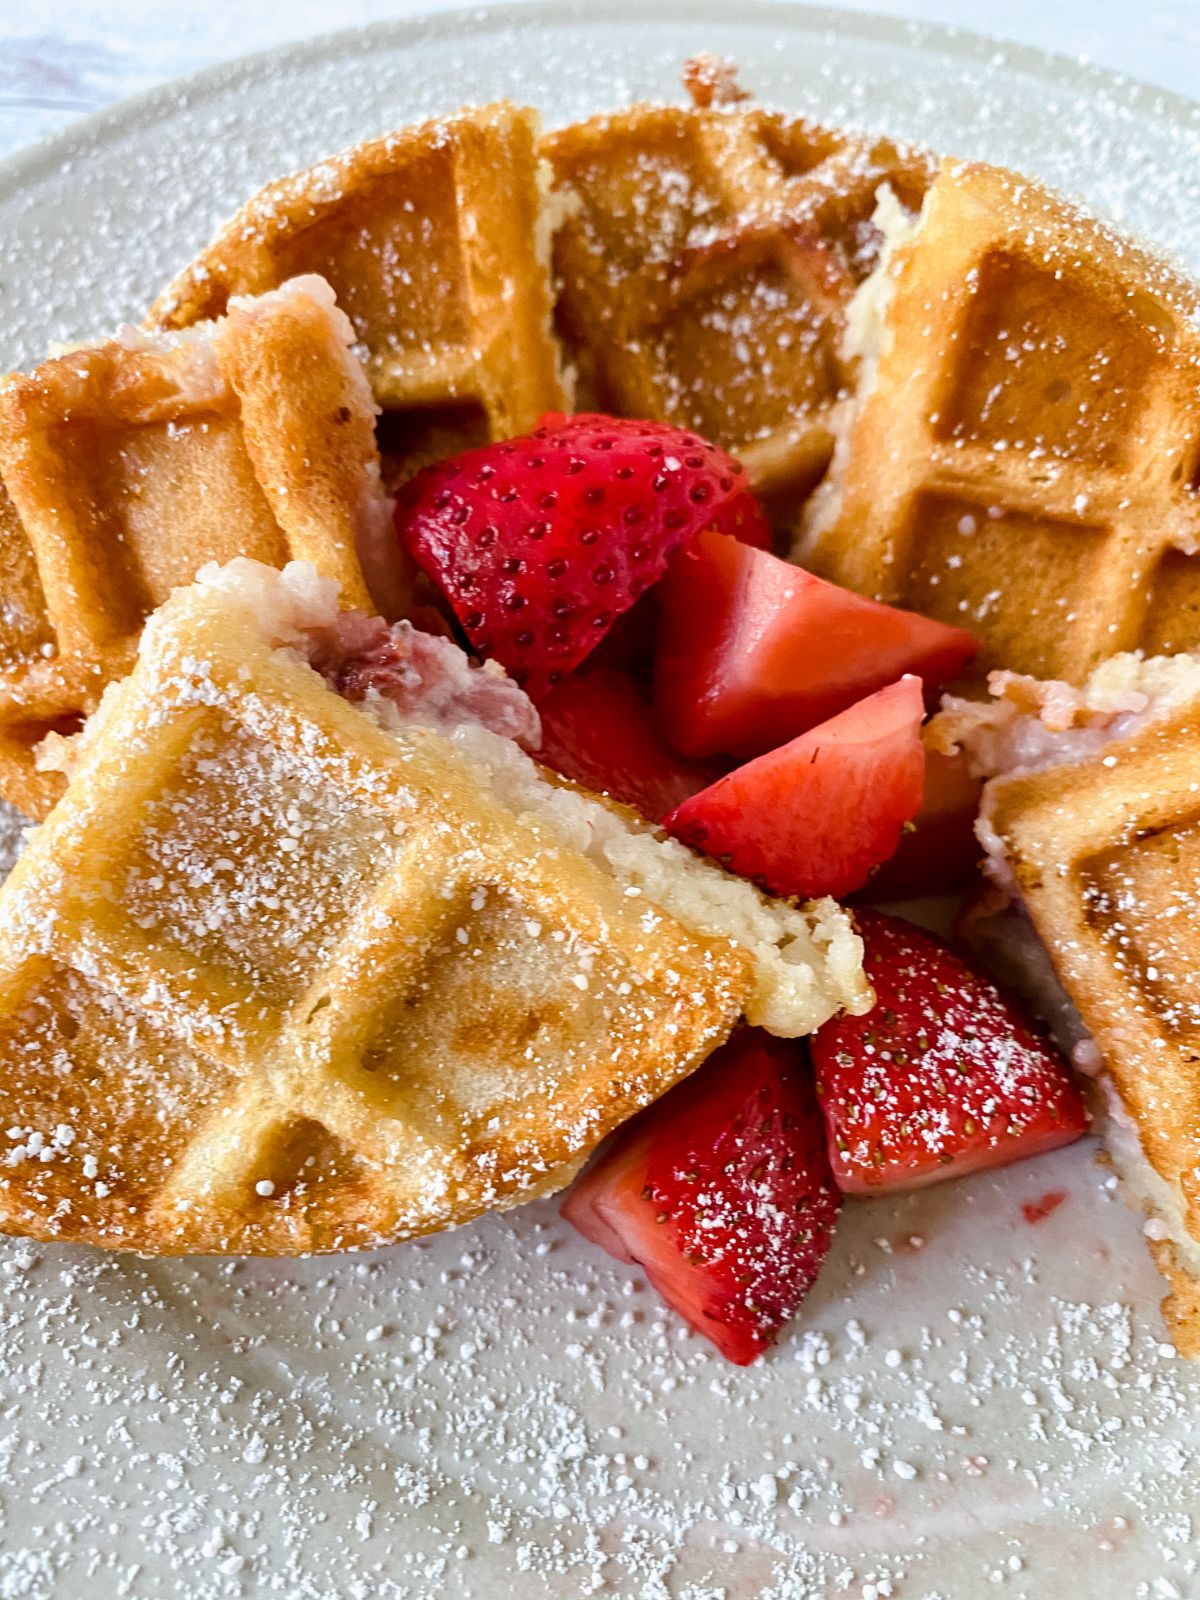 cream plate of waffles with berries and powdered sugar